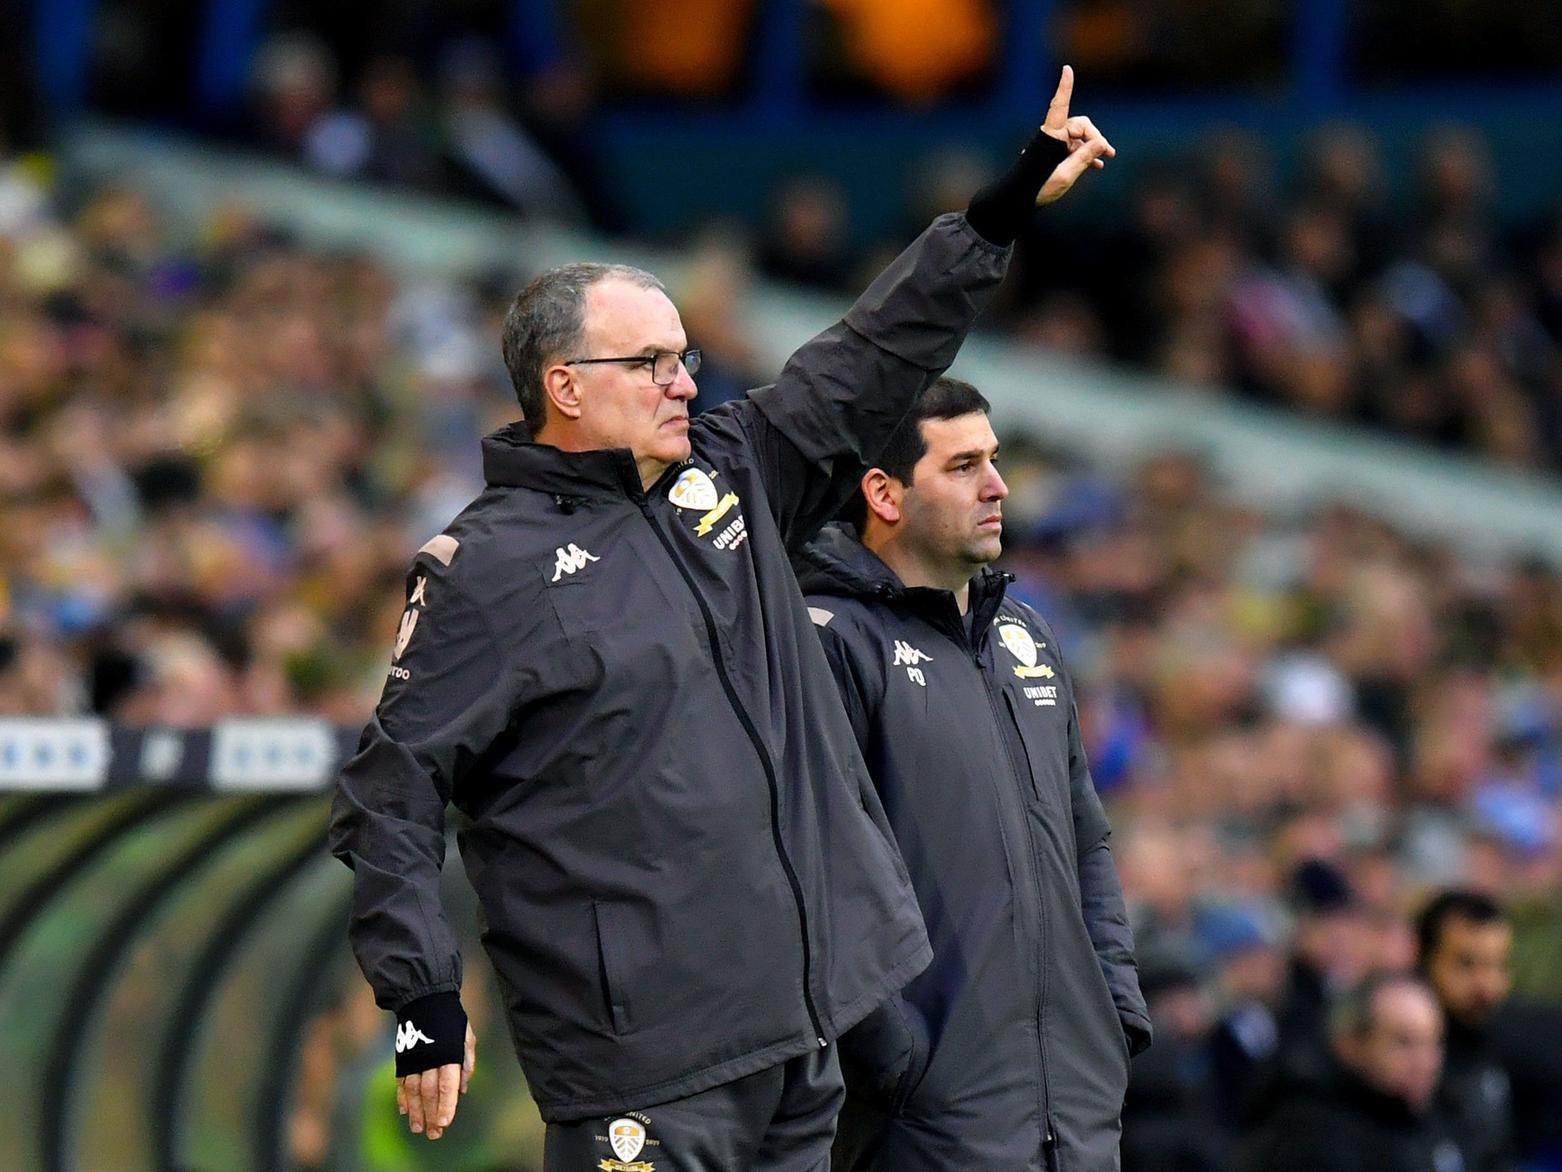 Marcelo Bielsa is pointing up - but will Leeds United go up? These data experts have their say